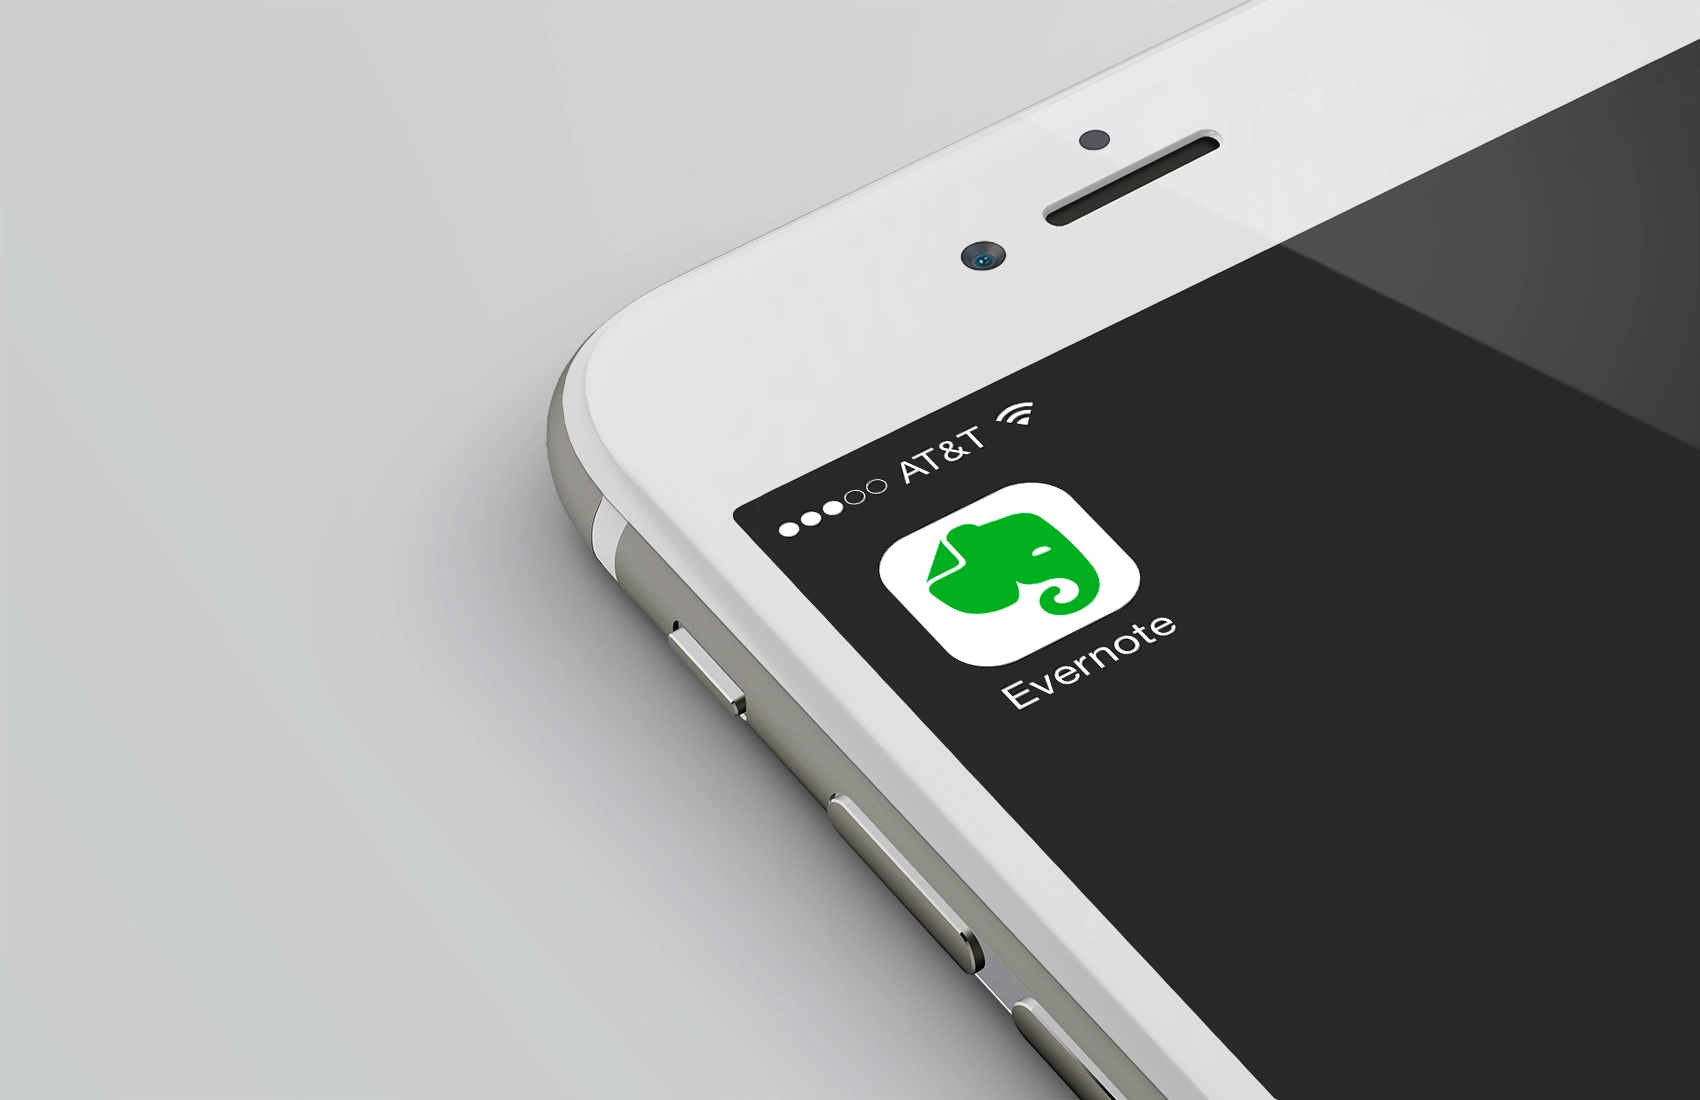 Evernote Quietly Joins the Antisurveillance Lobbying Movement